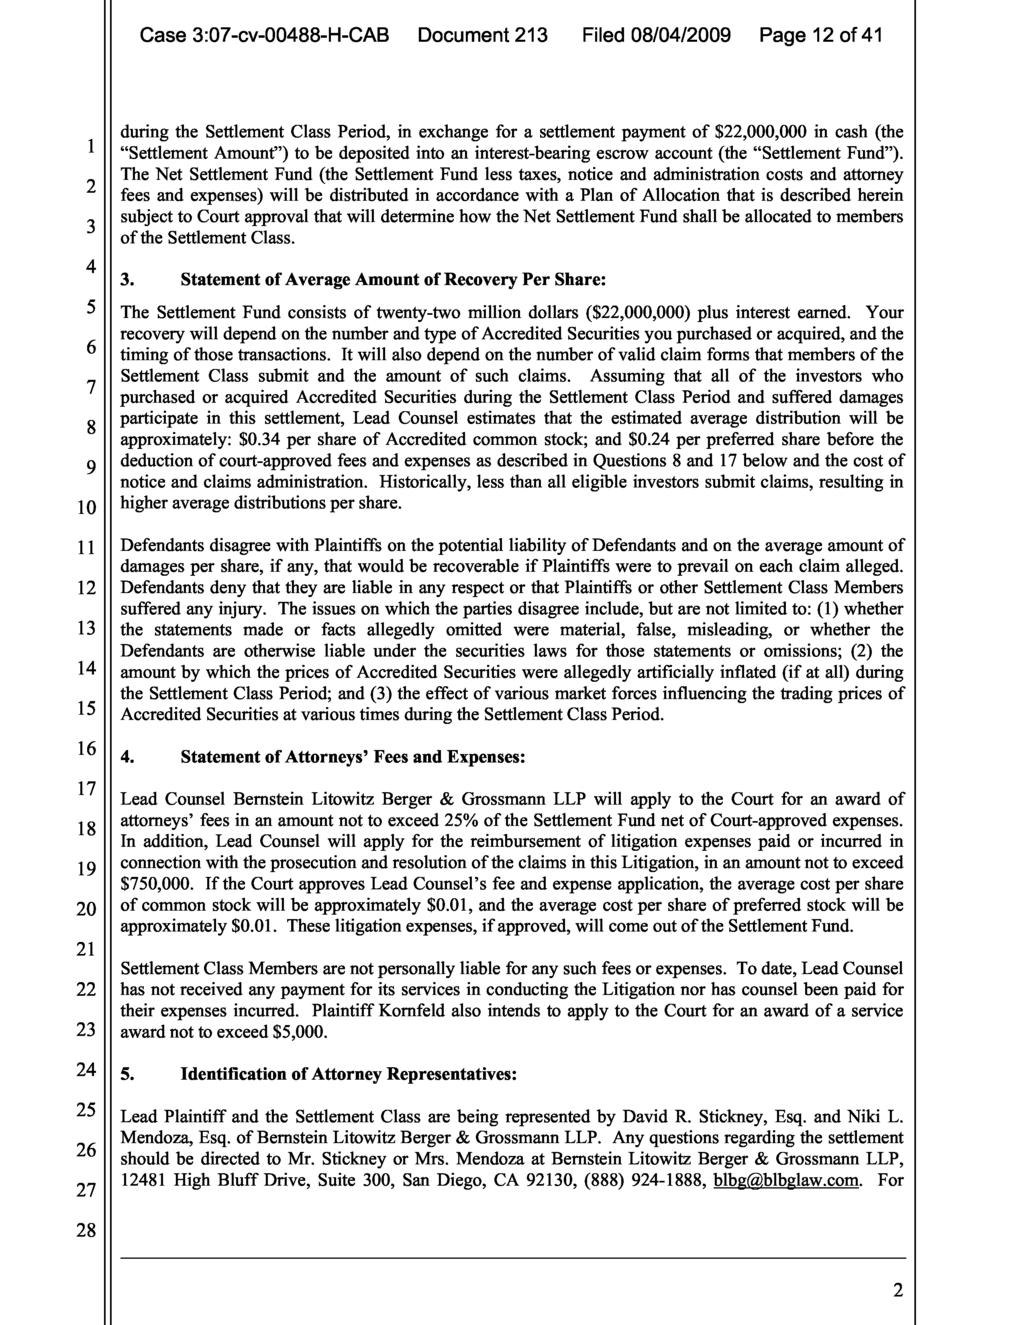 Case 3:07-cv-0088-H-CAB Document 213 Filed 08/0/2009 Page 12 of 1 during the Settlement Class Period, in exchange for a settlement payment of $22,000,000 in cash (the 1 Settlement Amount ) to be